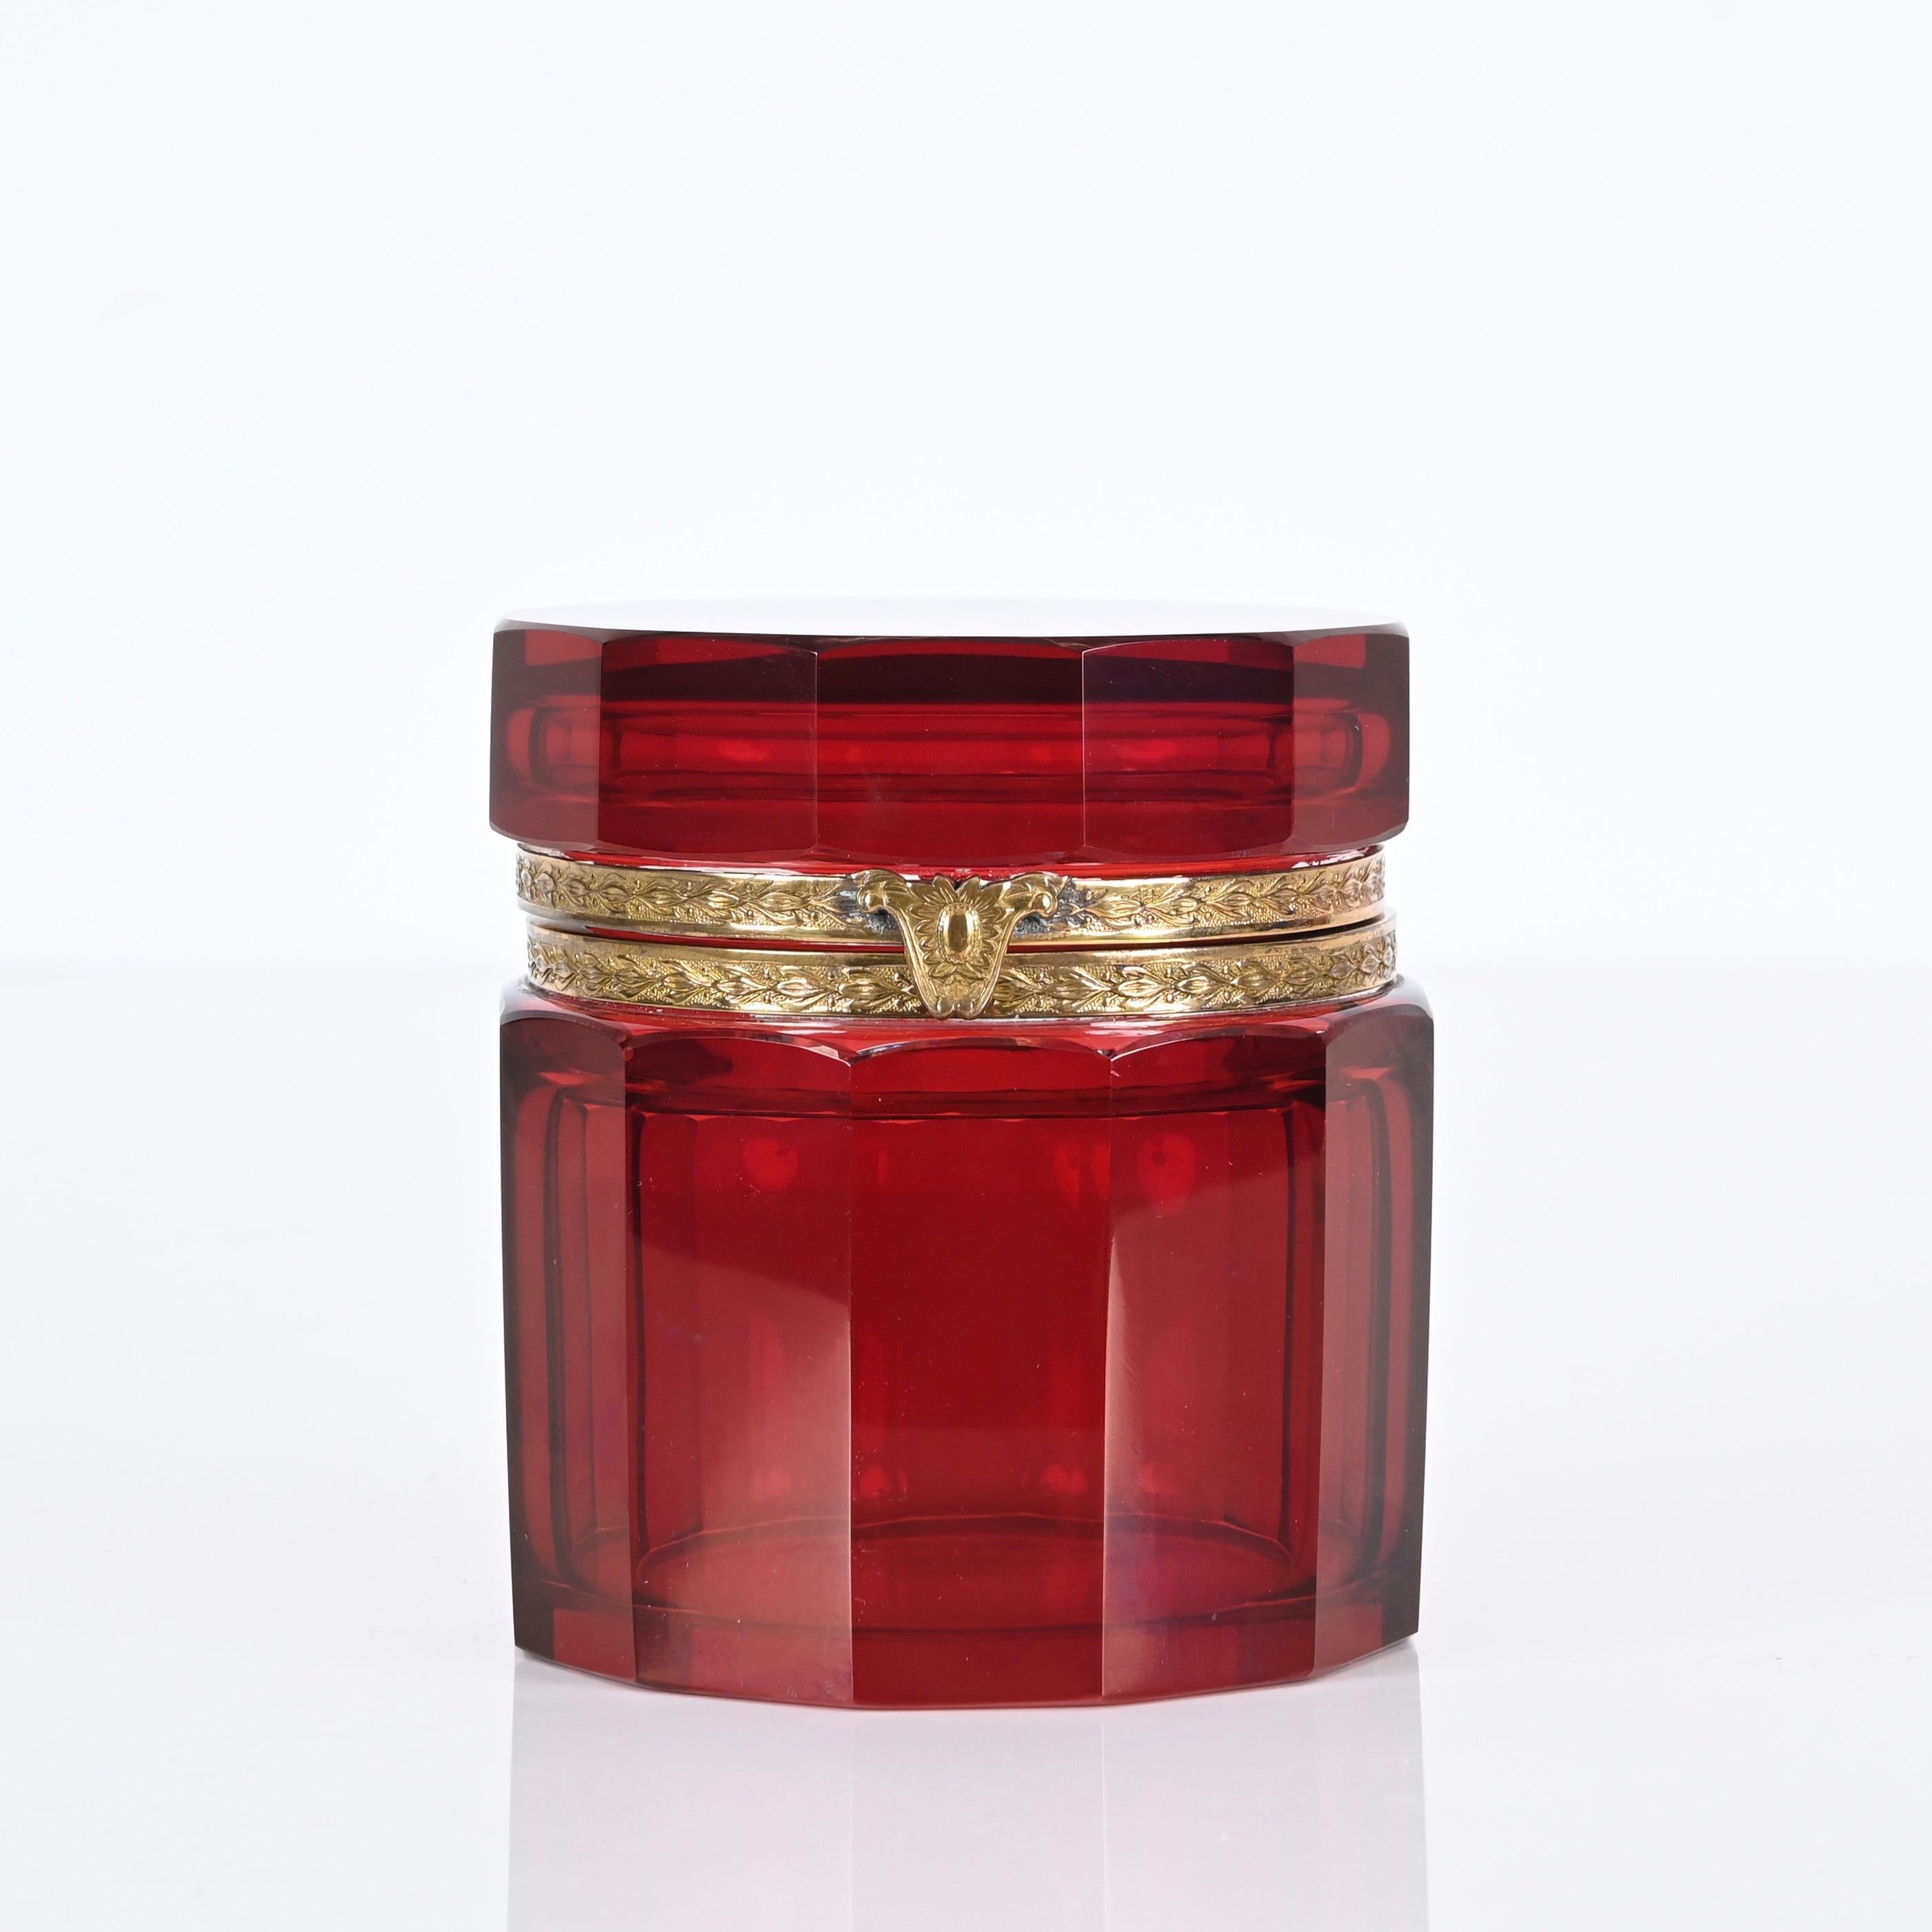 Stunning jewelry box in faceted ruby red Murano glass and gilt silver. This incredibly rare piece was produced in Italy in the 1920s. 

The box feature an exquisite 12 sided faceted ruby red glass that shines from all angles, the box hinge is made